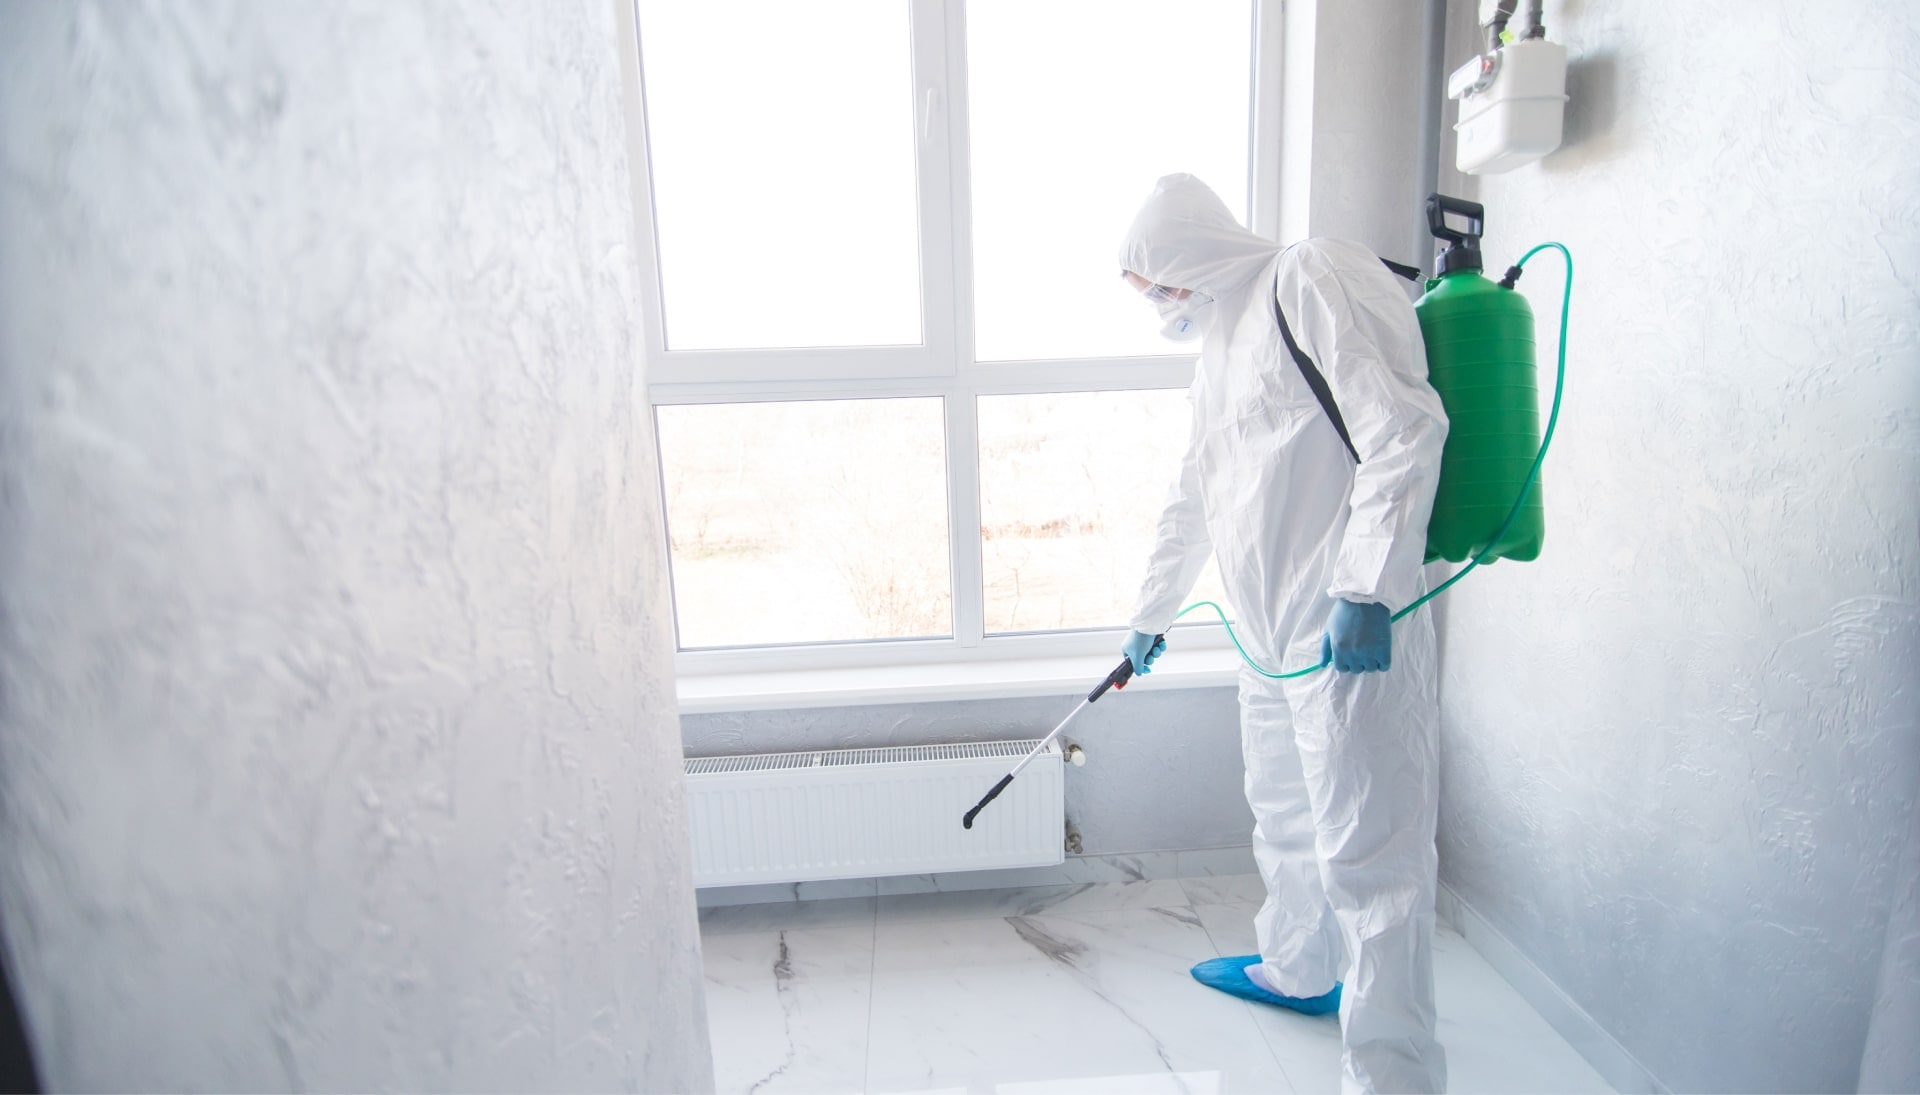 We provide the highest-quality mold inspection, testing, and removal services in the Greenville, South Carolina area.